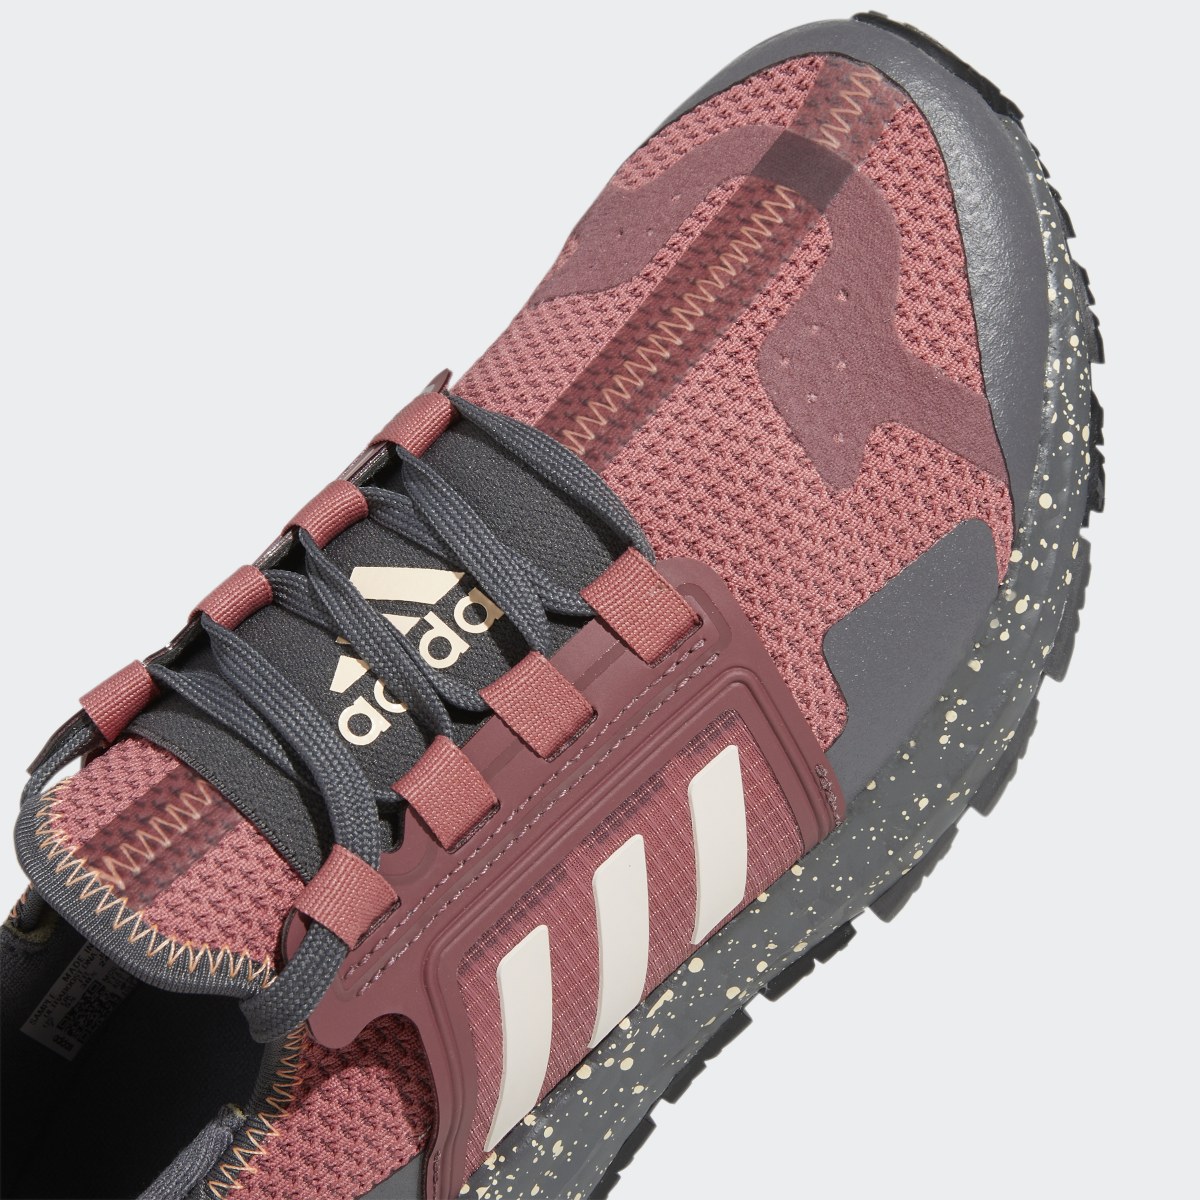 Adidas Ultraboost DNA City Explorer Outdoor Trail Running Sportswear Lifestyle Shoes. 9